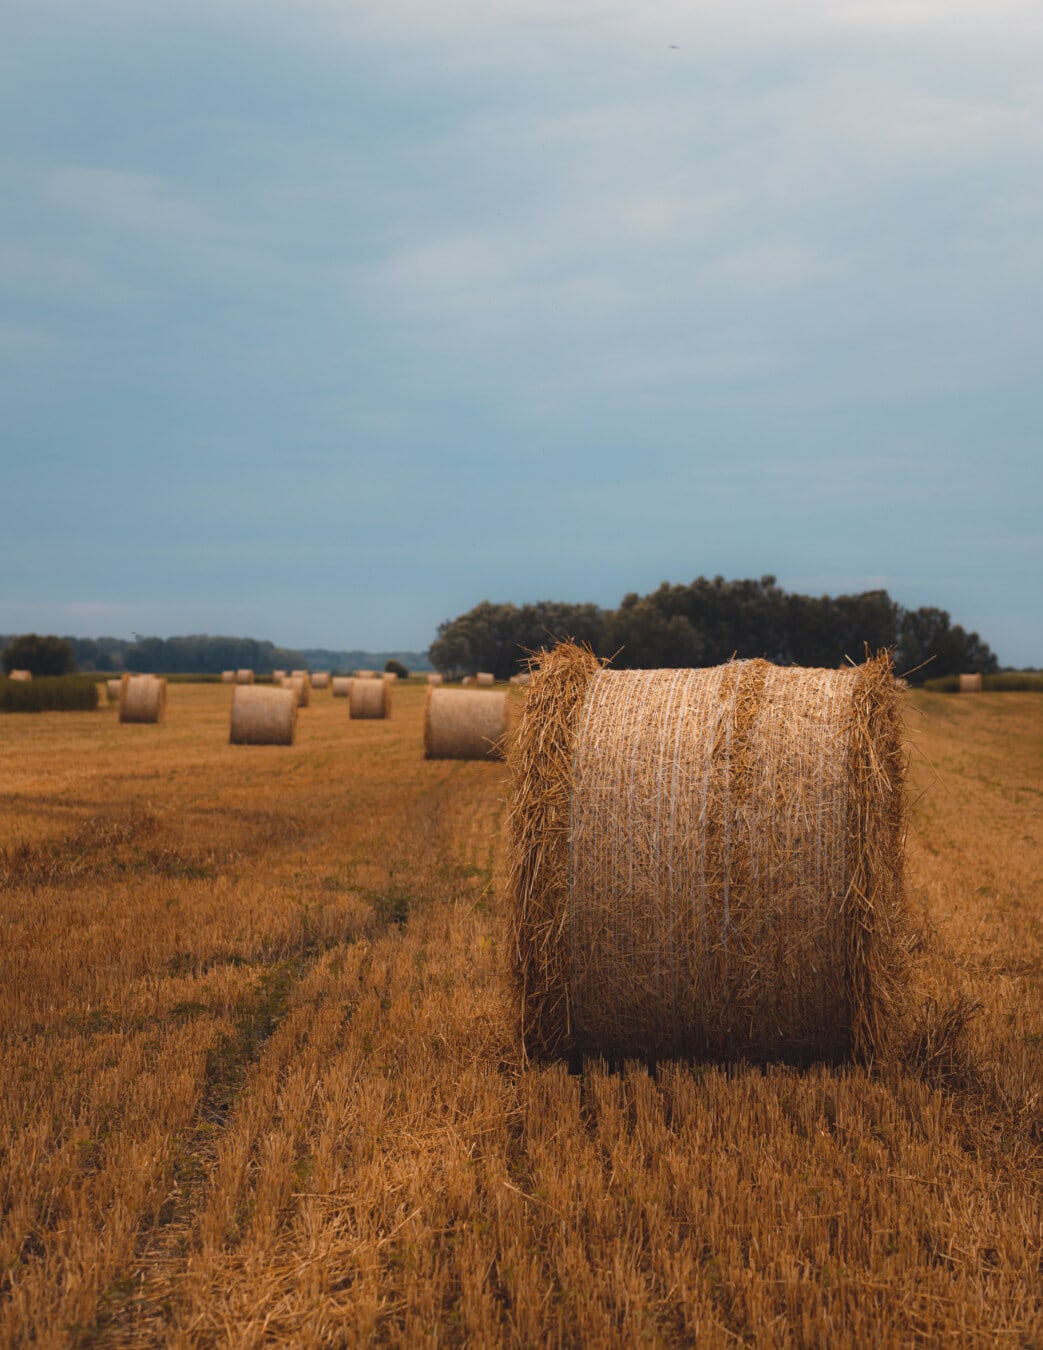 haystack, round, bale, flat field, packages, summer season, agriculture, field, hay, straw